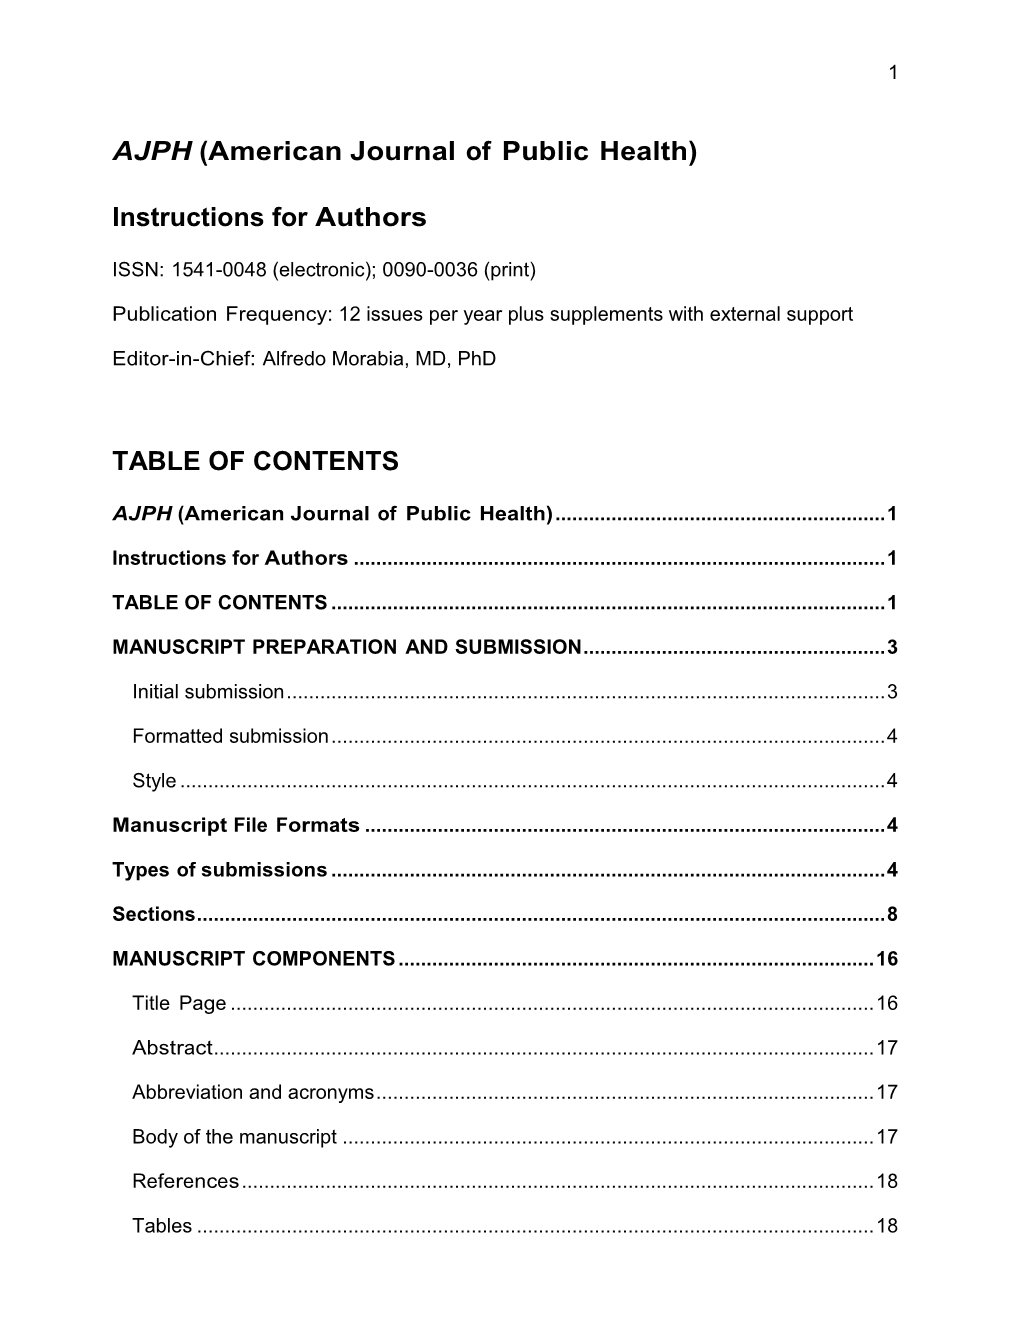 Instructions for Authors TABLE of CONTENTS